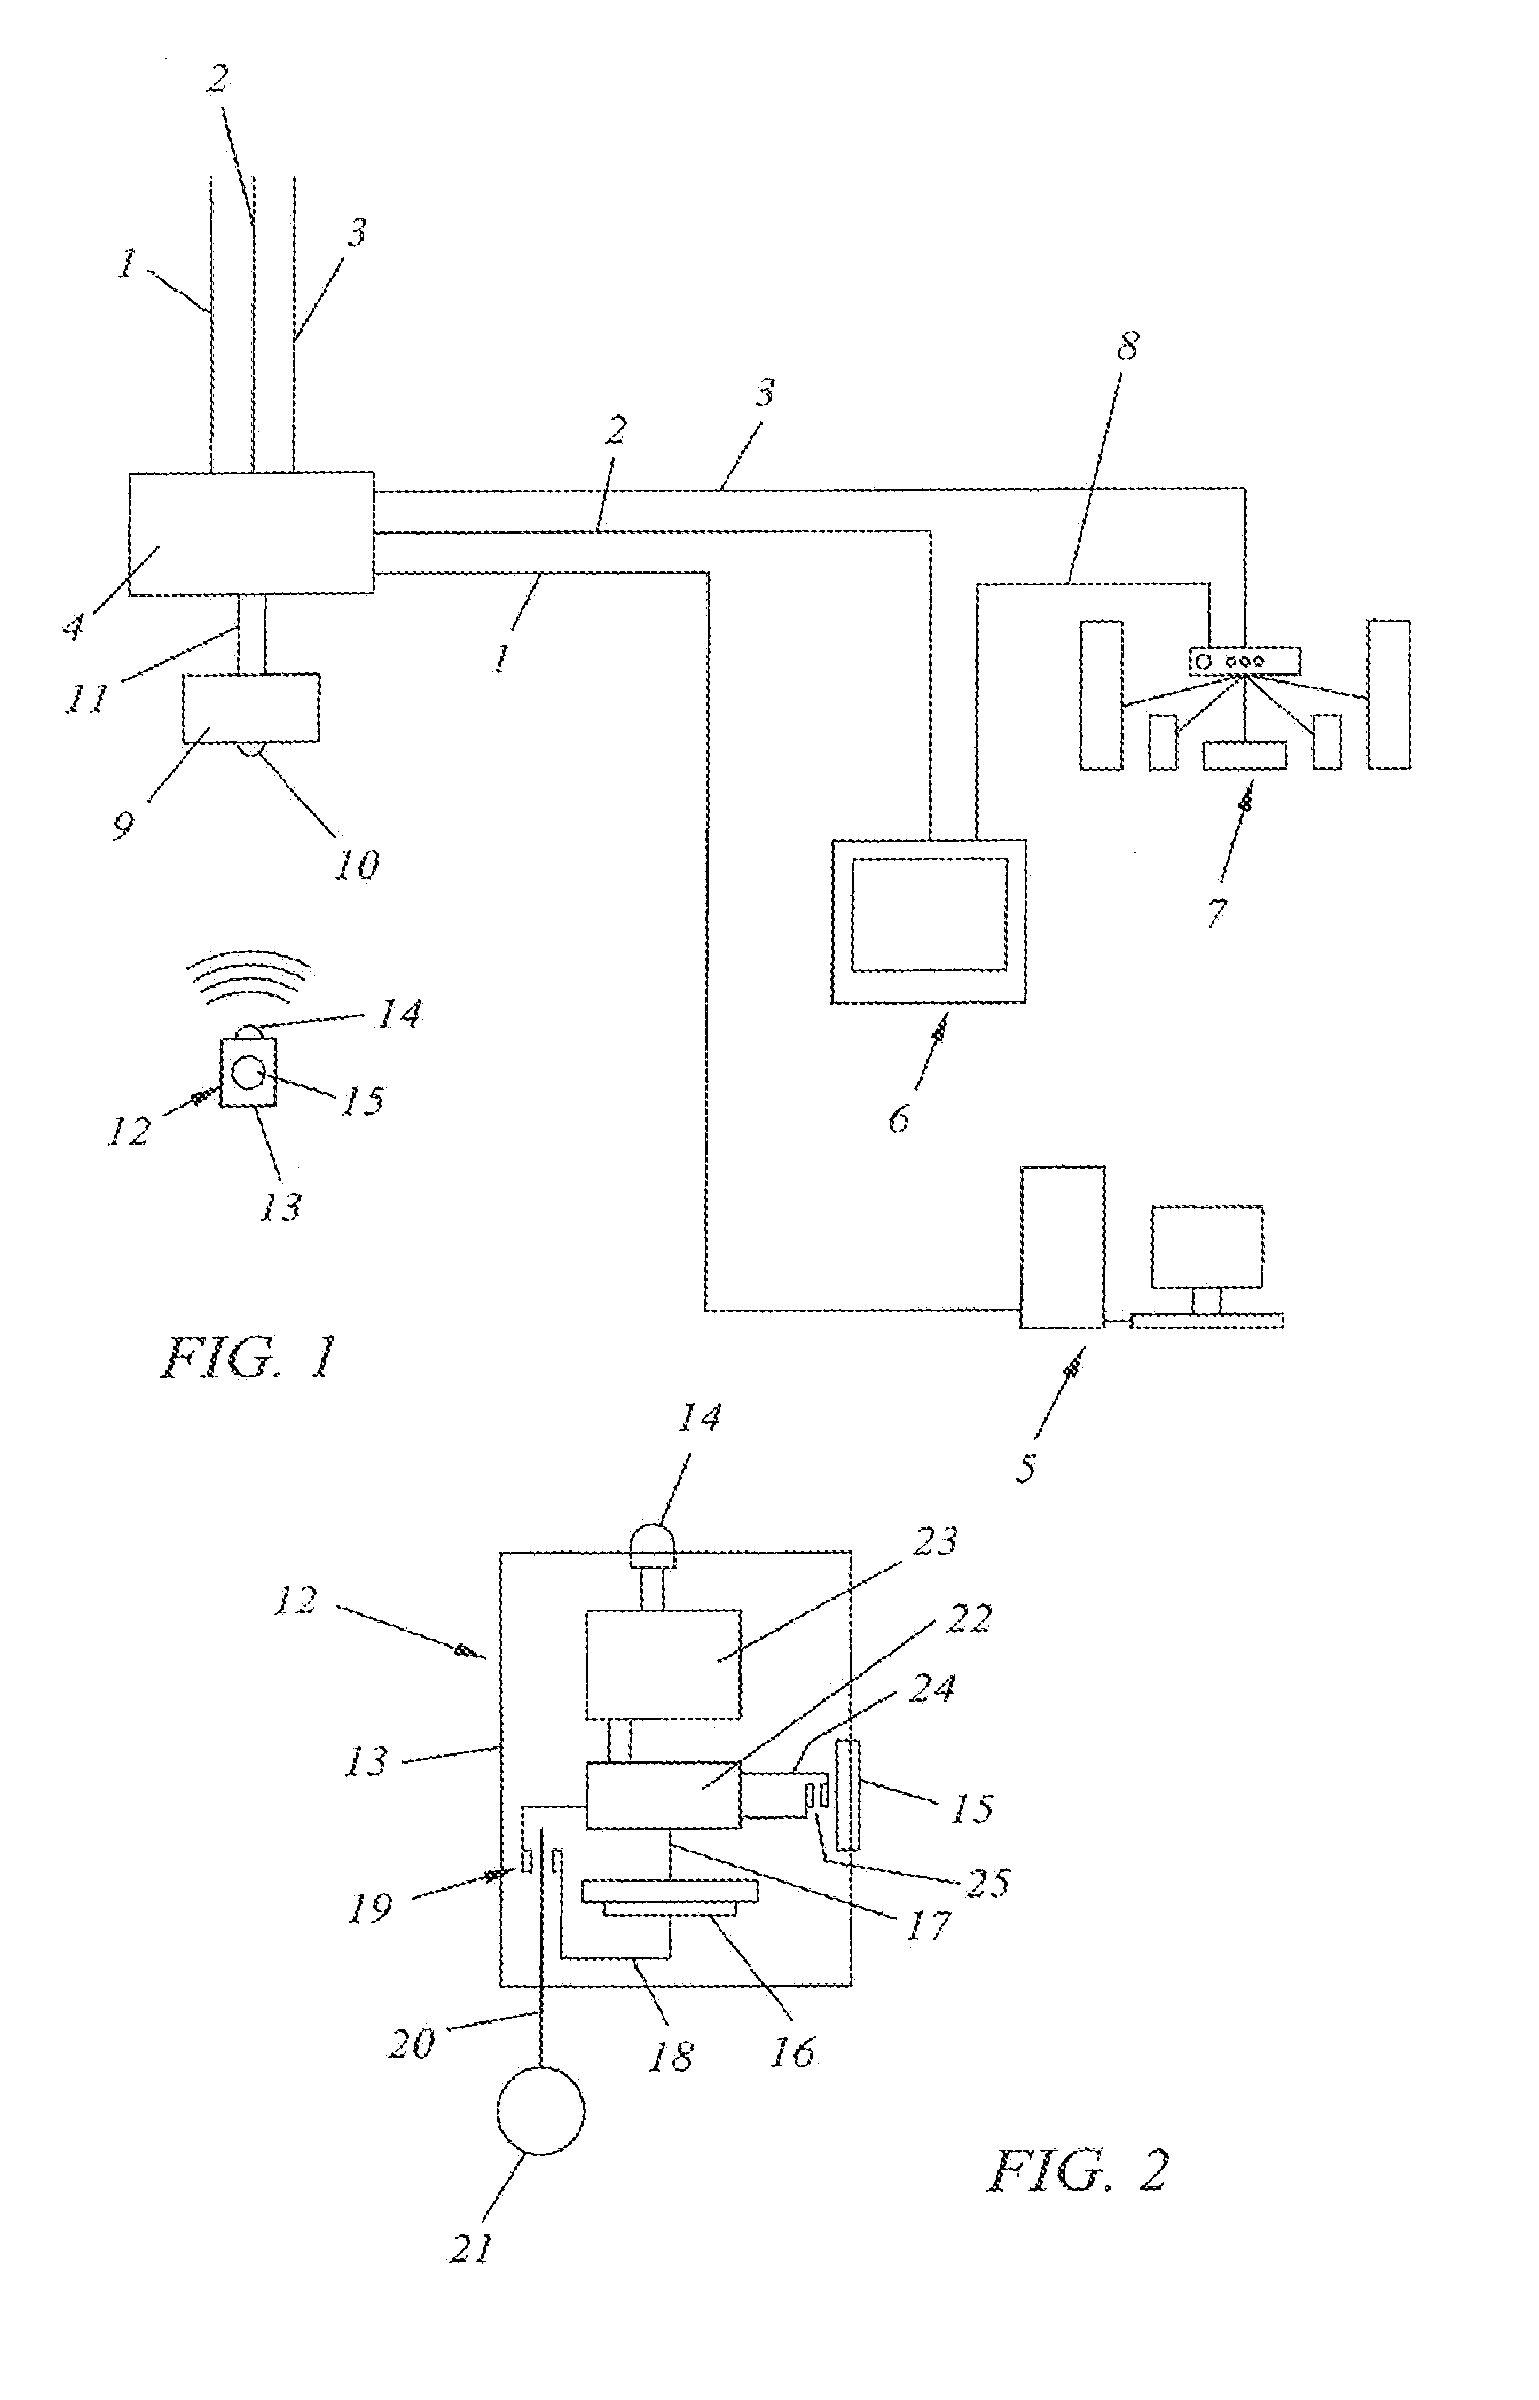 System and method for providing controlled access